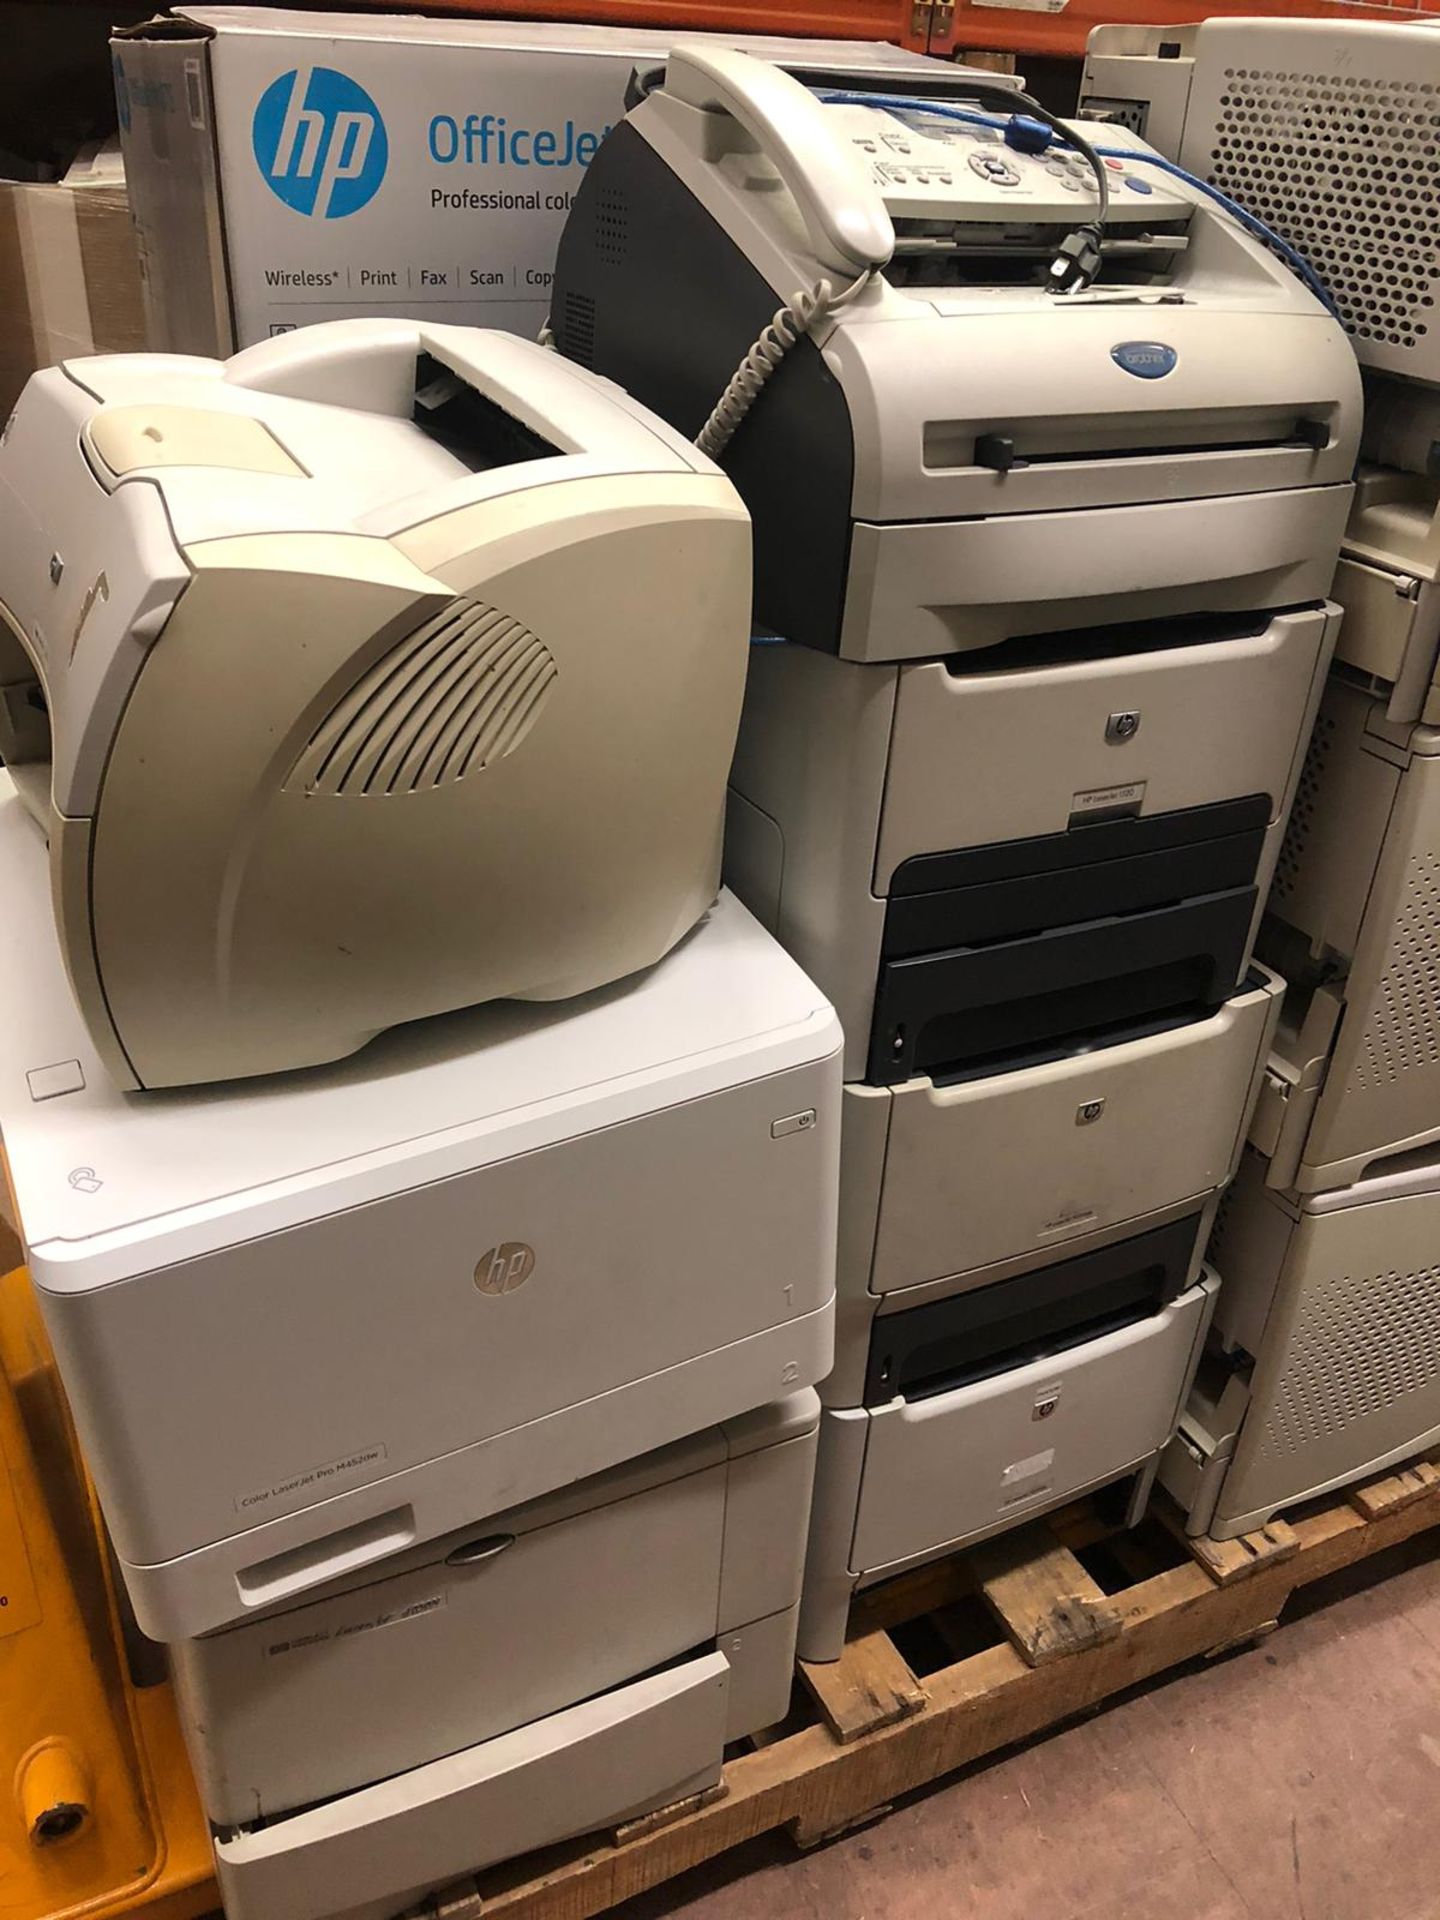 Pallet of Printers, Fax Machines, Scanners, some in box